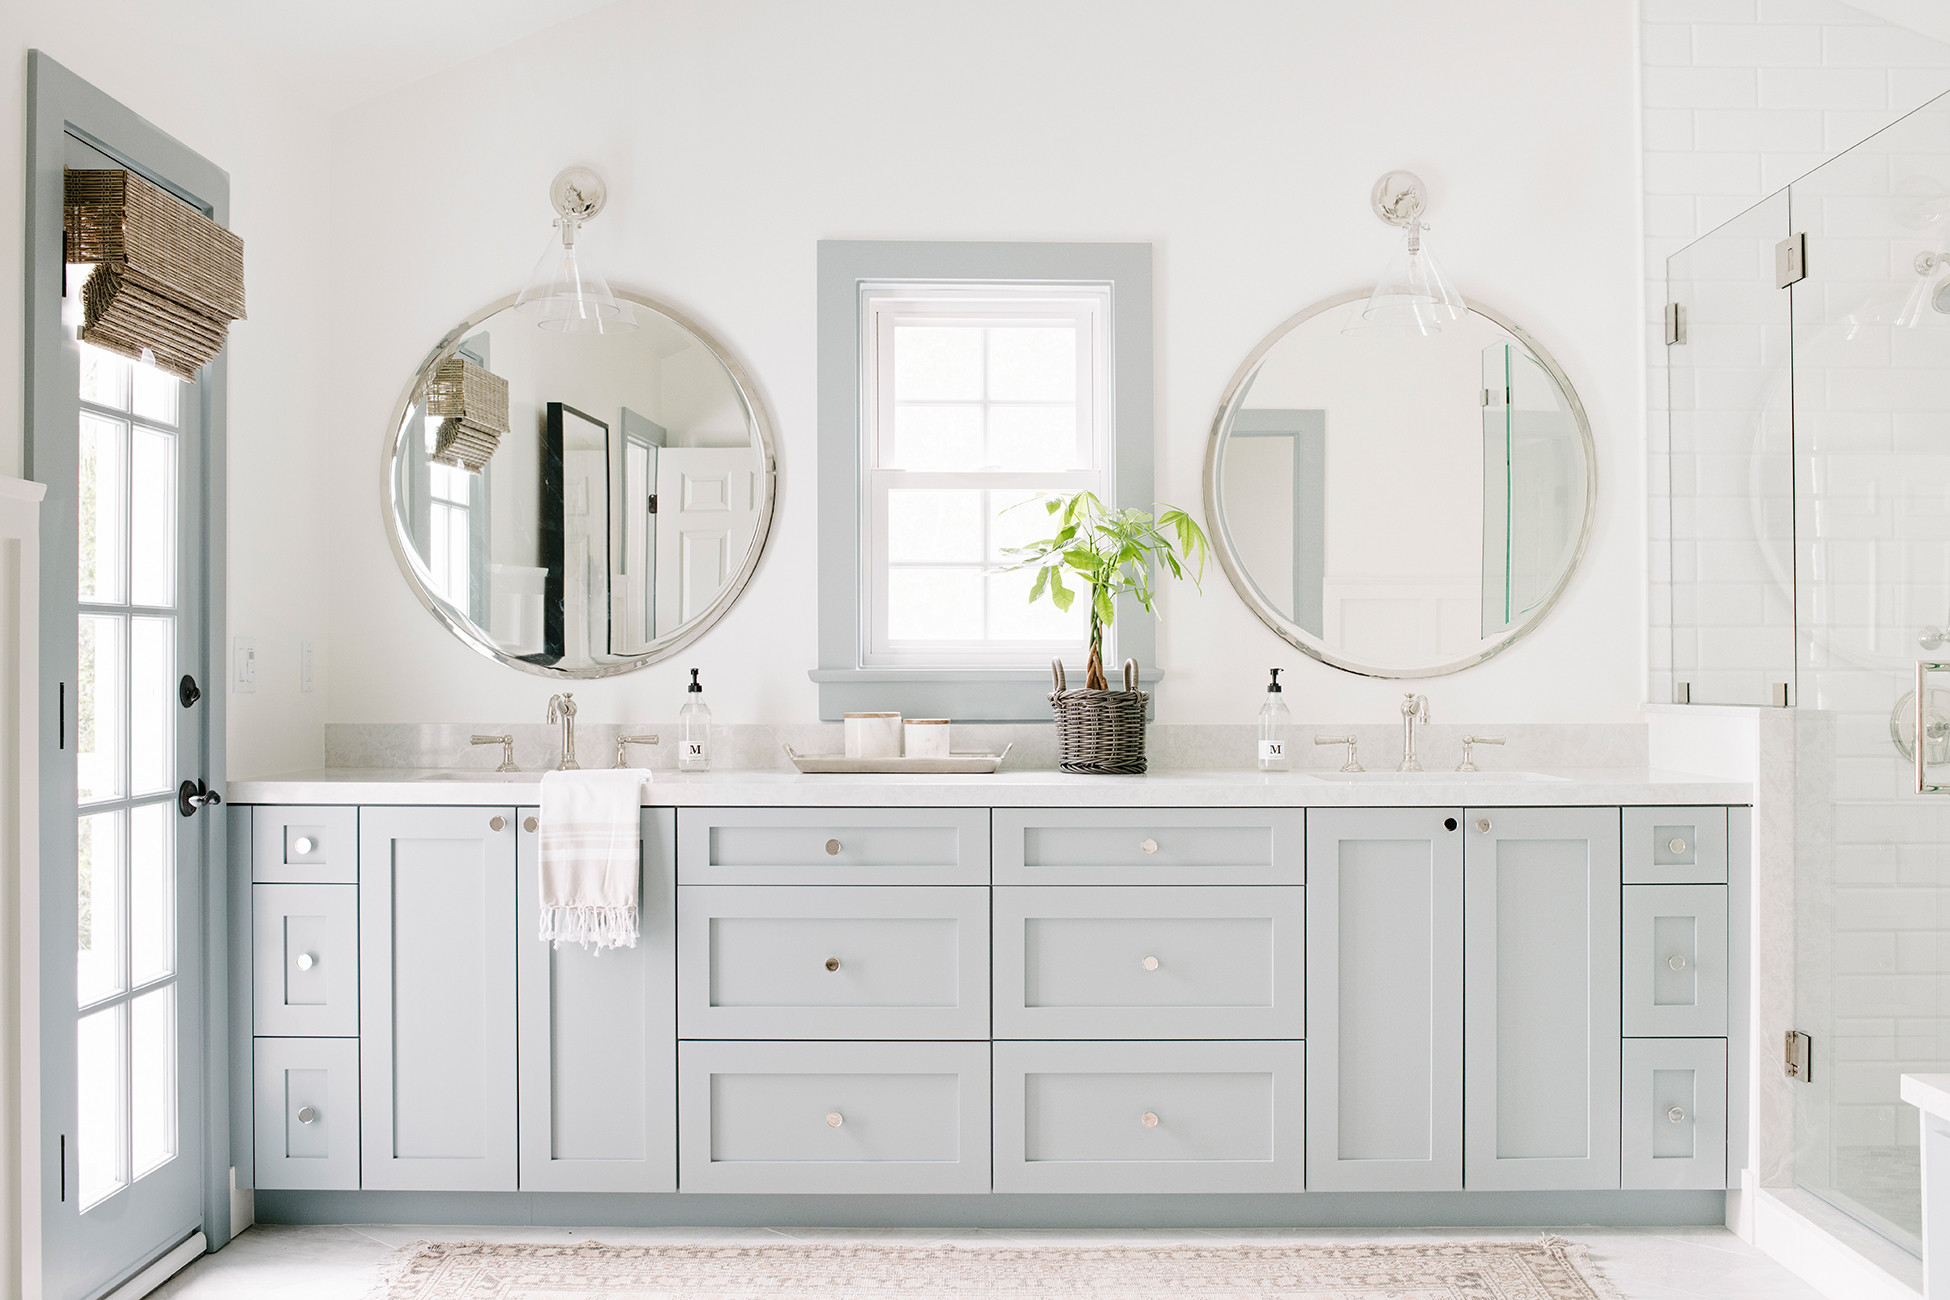 Master Bathroom Paint Colors
 These Are the Most Popular Bathroom Paint Colors for 2020